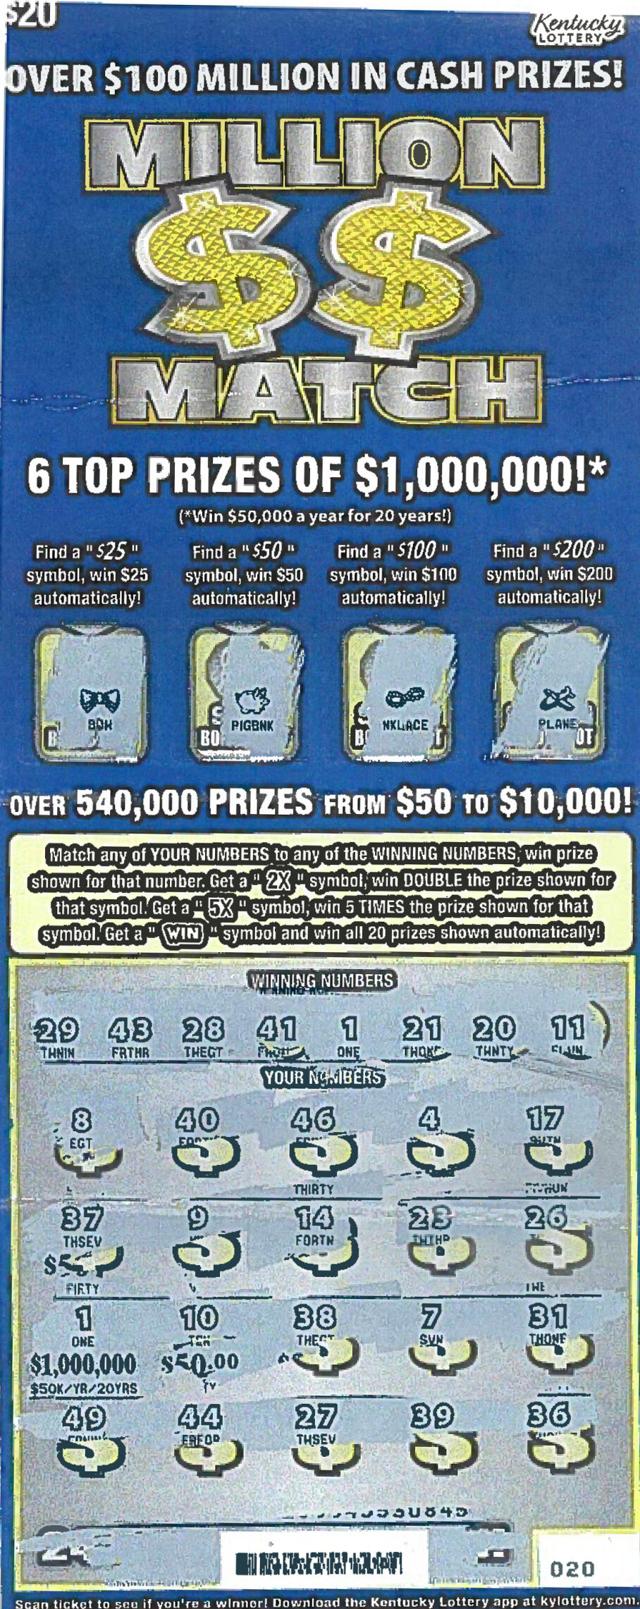 Louisville man scores $1 million with Ky. Lottery scratch-off ticket ...